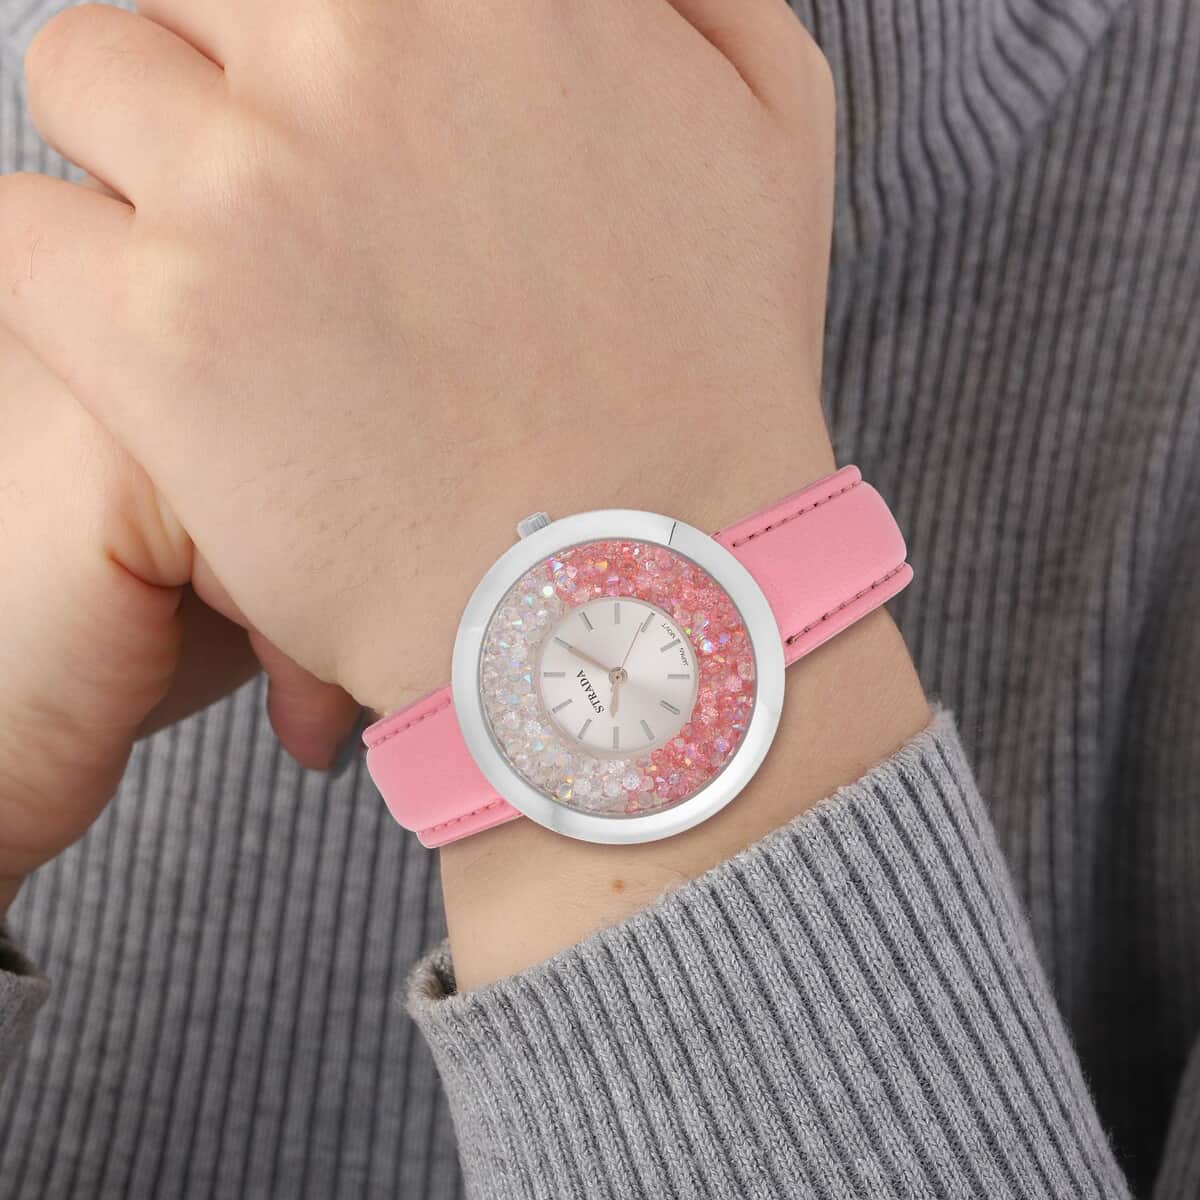 Strada Pink and Aurora Borealis Austrian Crystal Japanese Movement Water Resistant Watch with Pink Faux Leather Band and Stainless Steel Back (40mm) (6.75-8.5In) image number 2